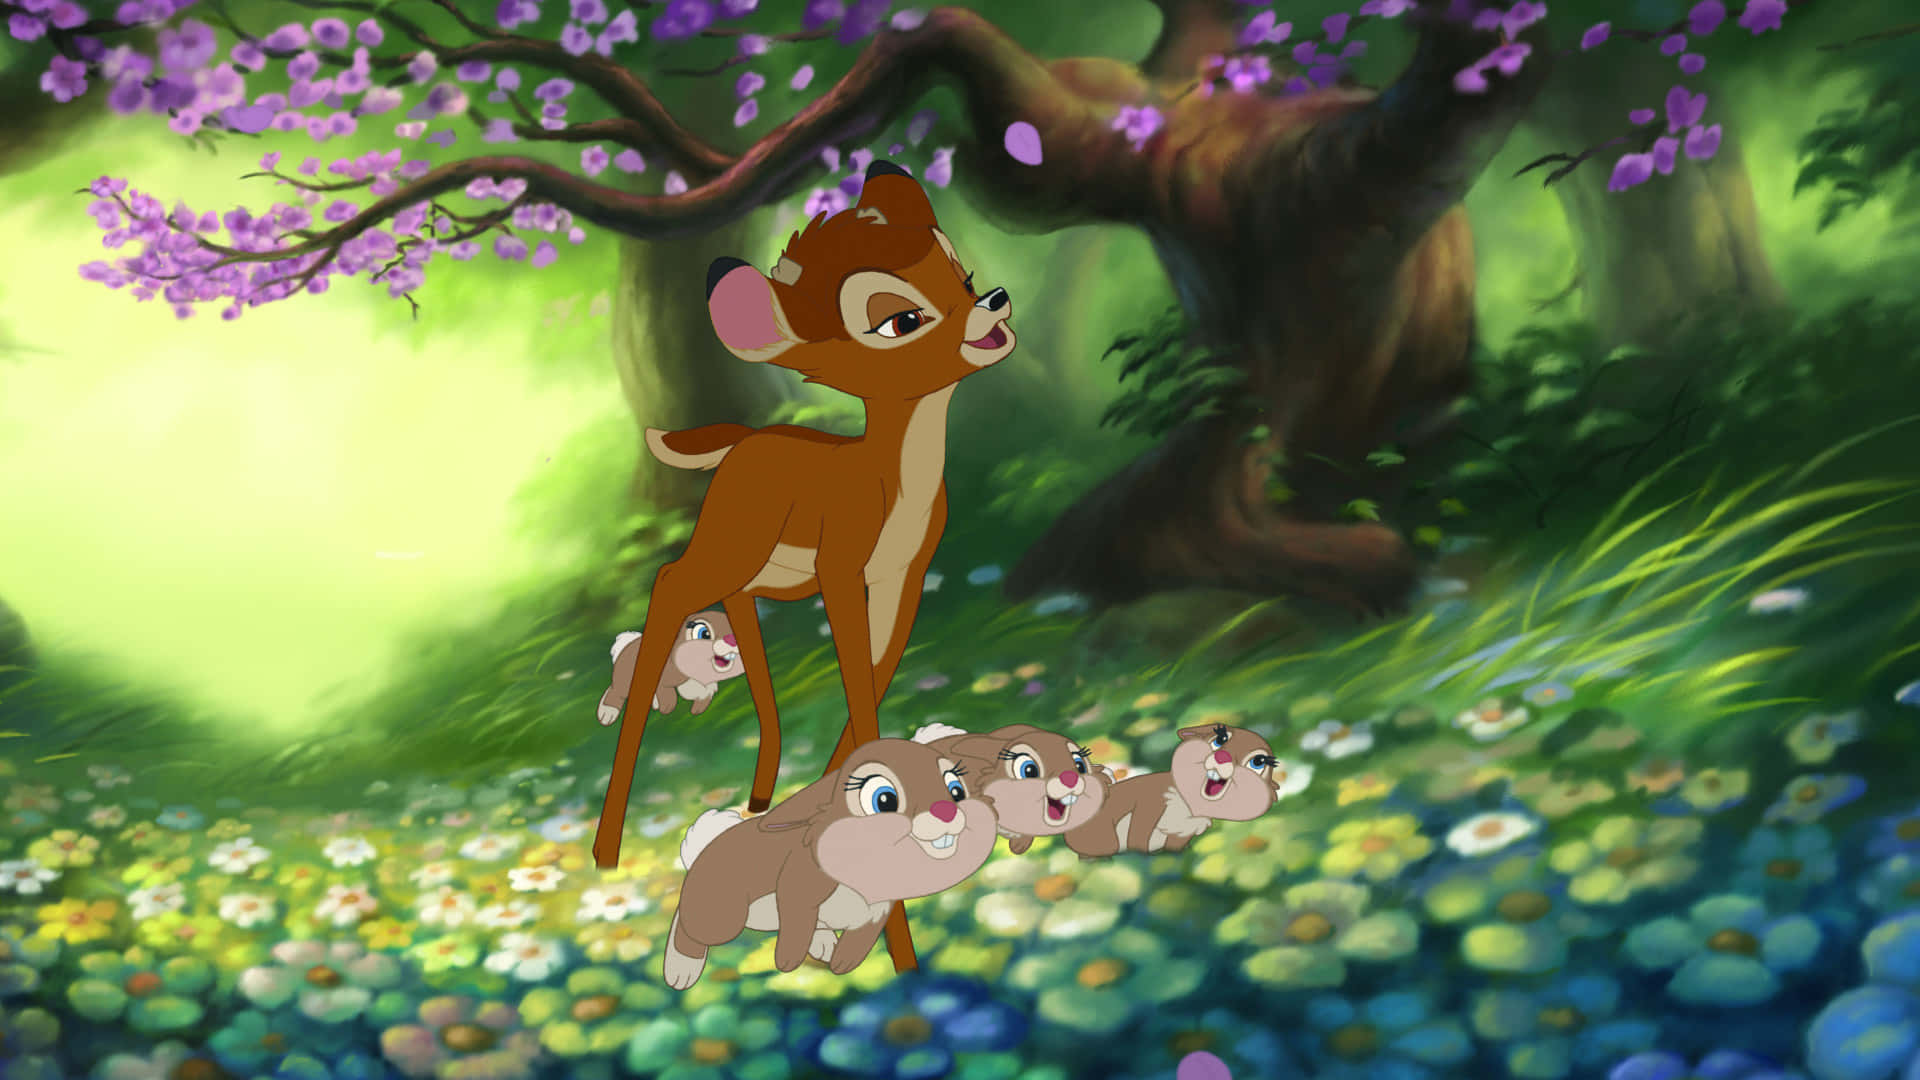 Walt Disney's animated classic Bambi remains an all-time classic